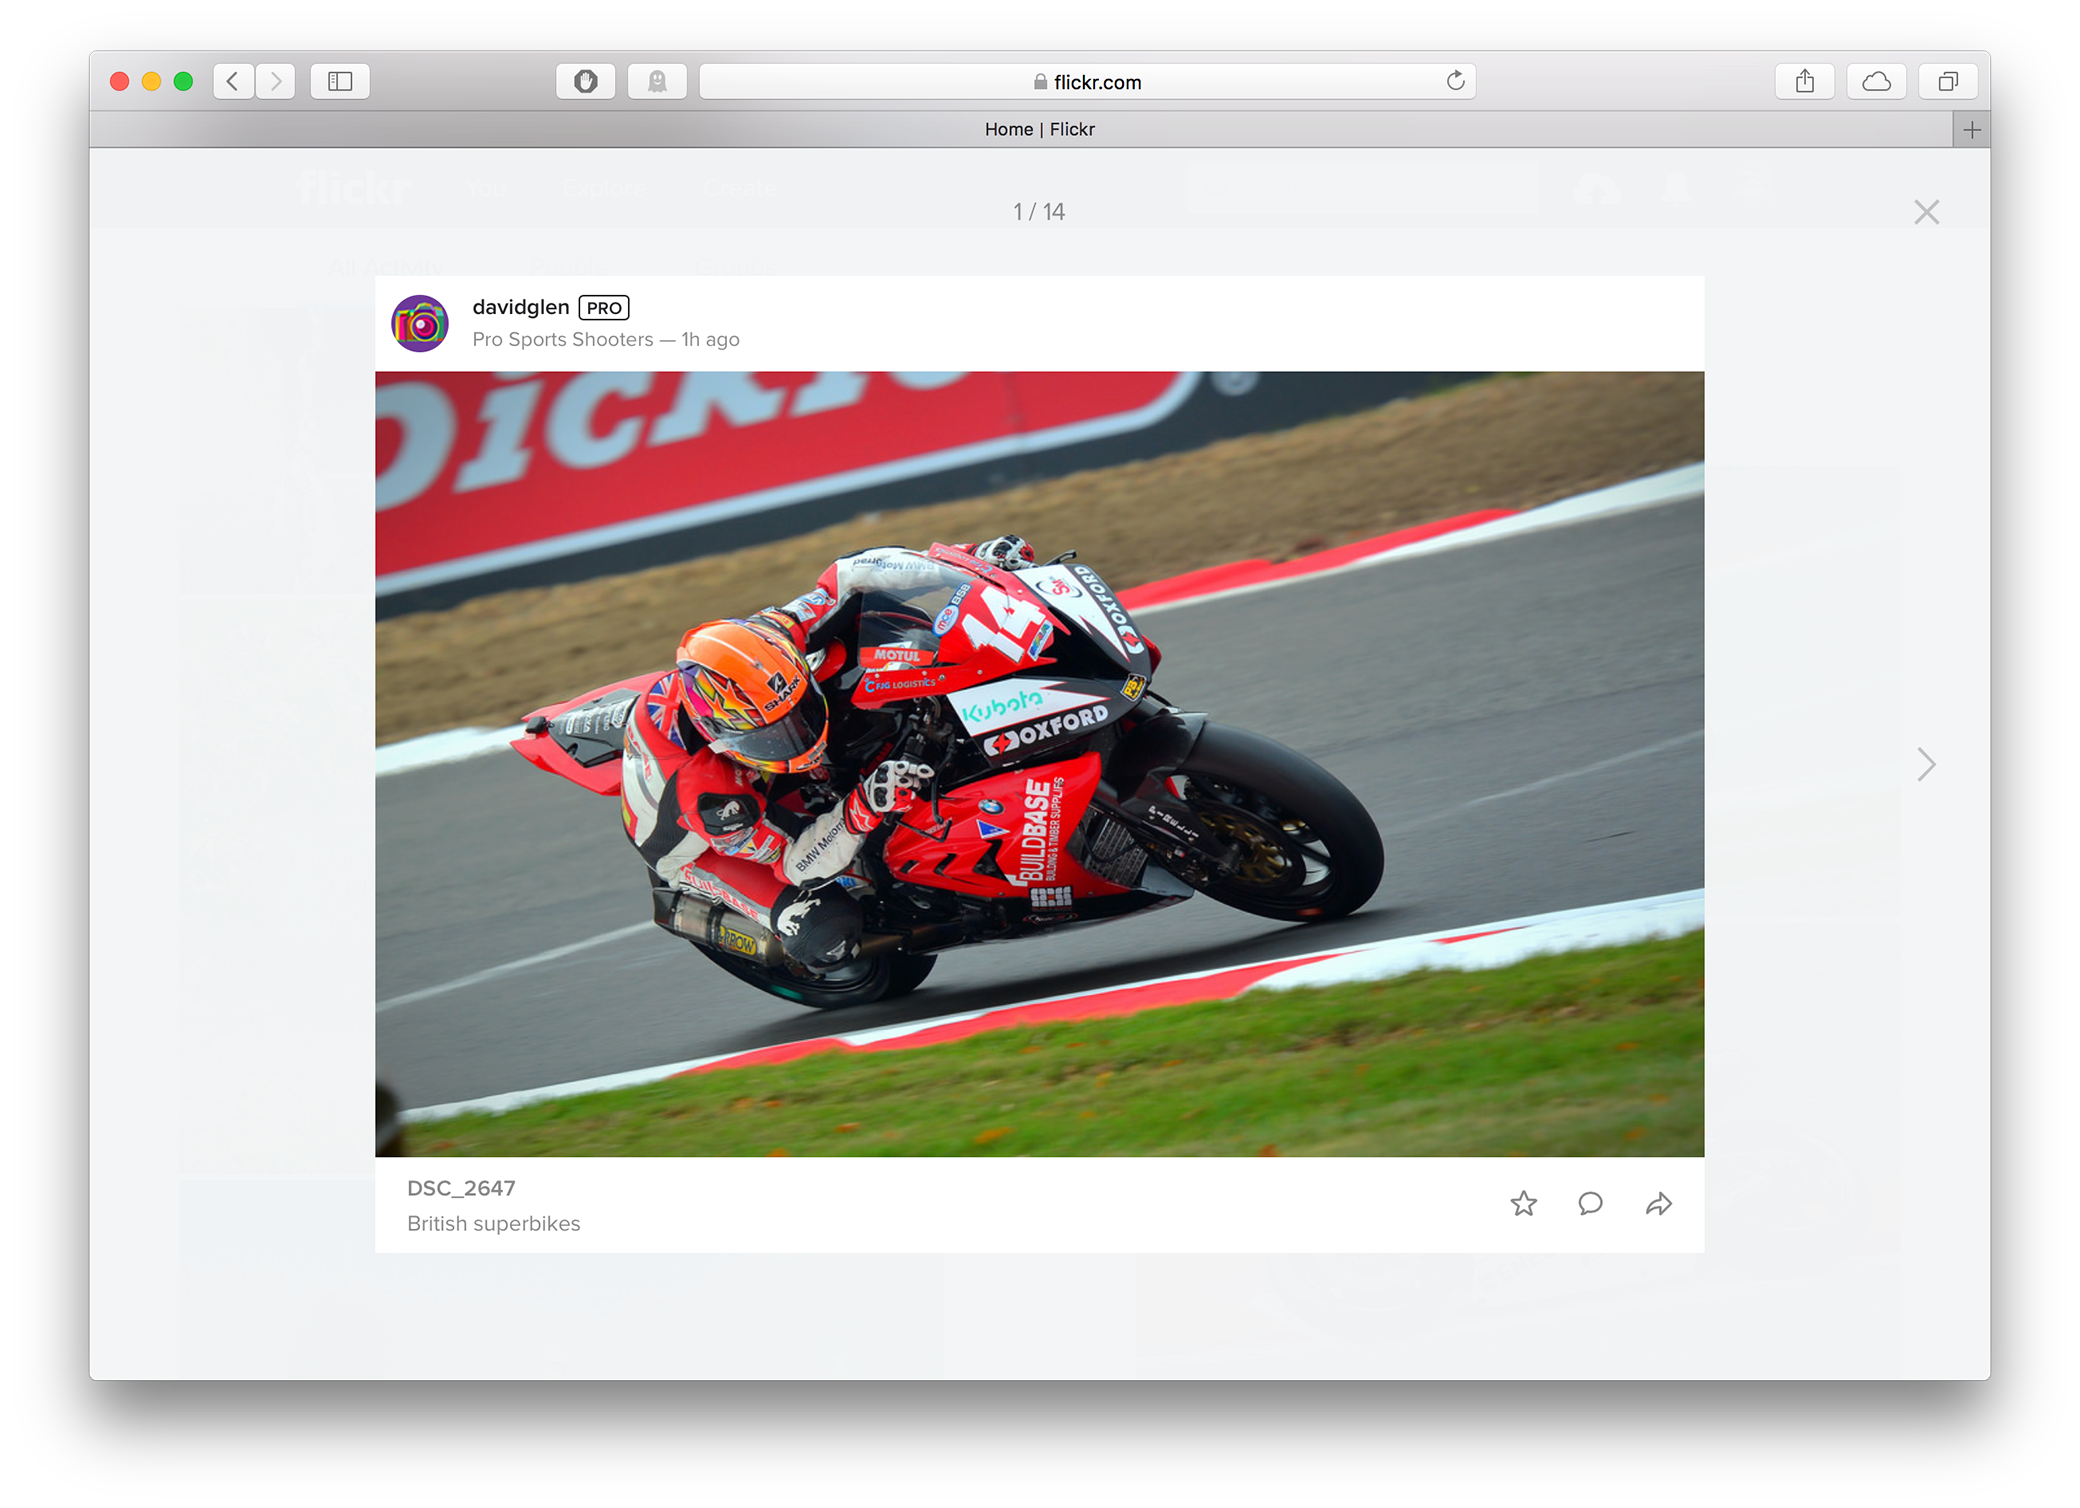 Pop-up view of a photo on the new Flickr homepage feed